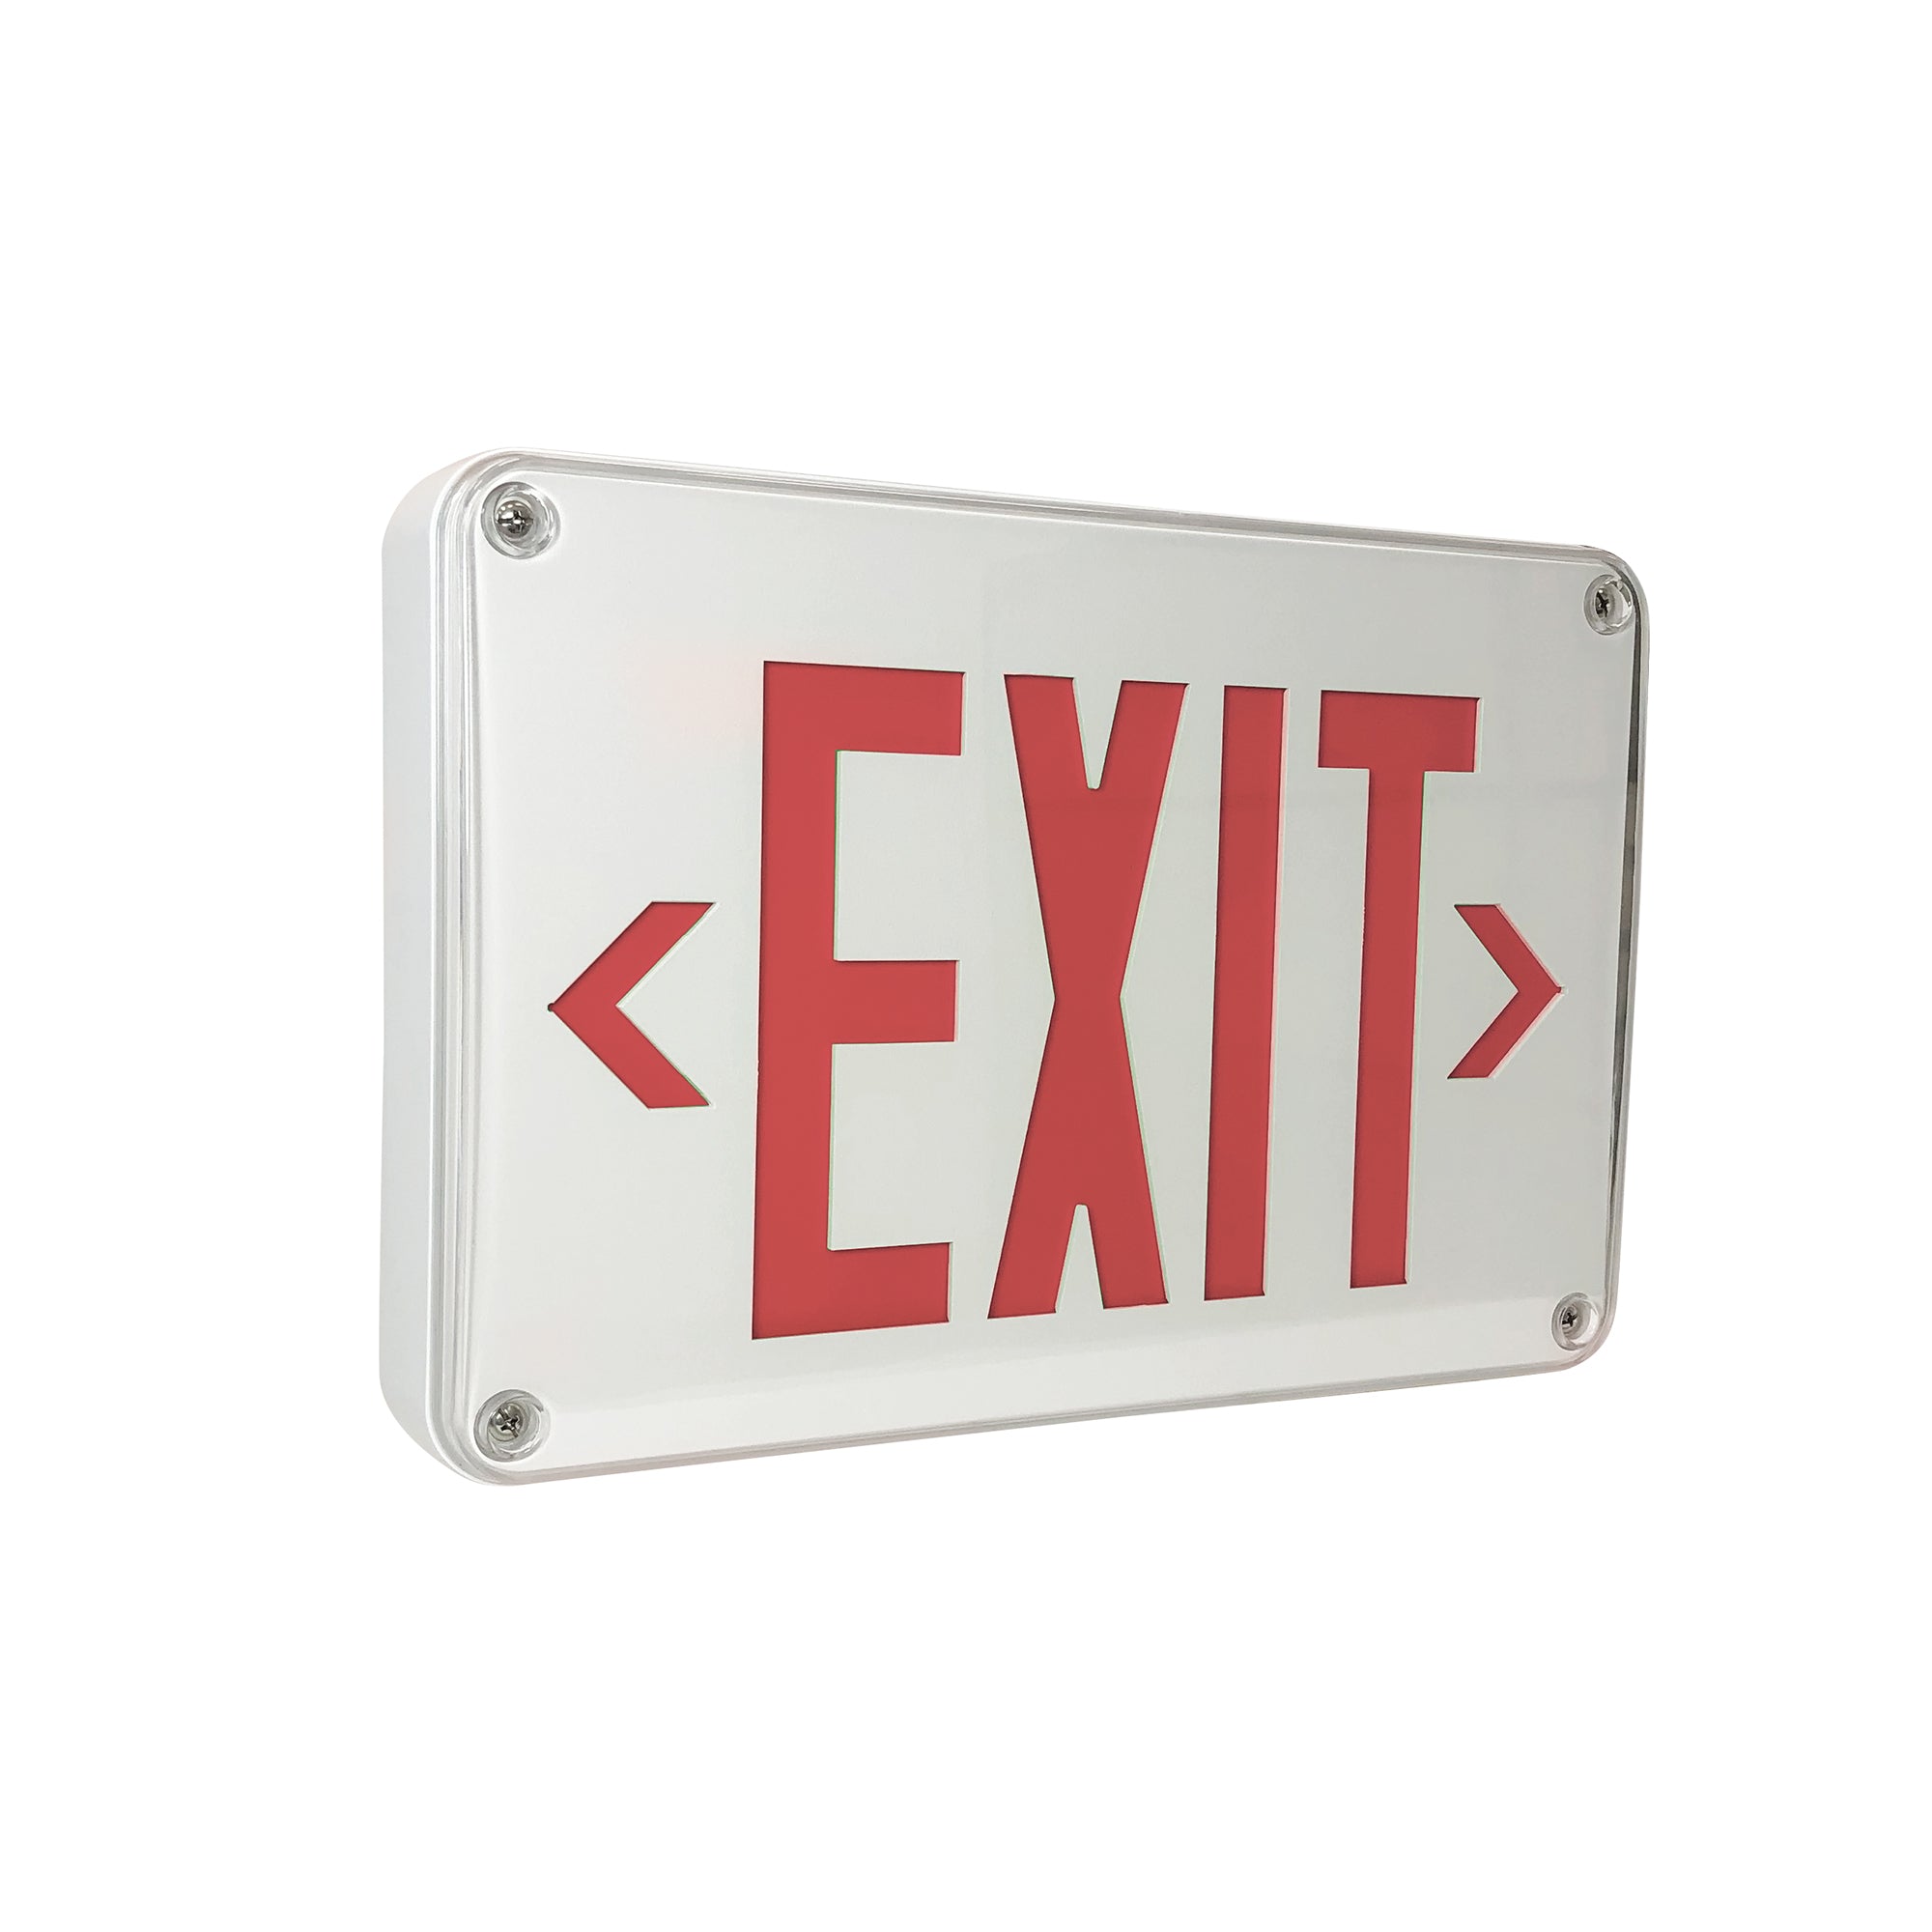 Nora Lighting NX-617-LED/R - Exit / Emergency - LED Self-Diagnostic Wet Location Exit Sign w/ Battery Backup, White Housing w/ 6 Inch Red Letters